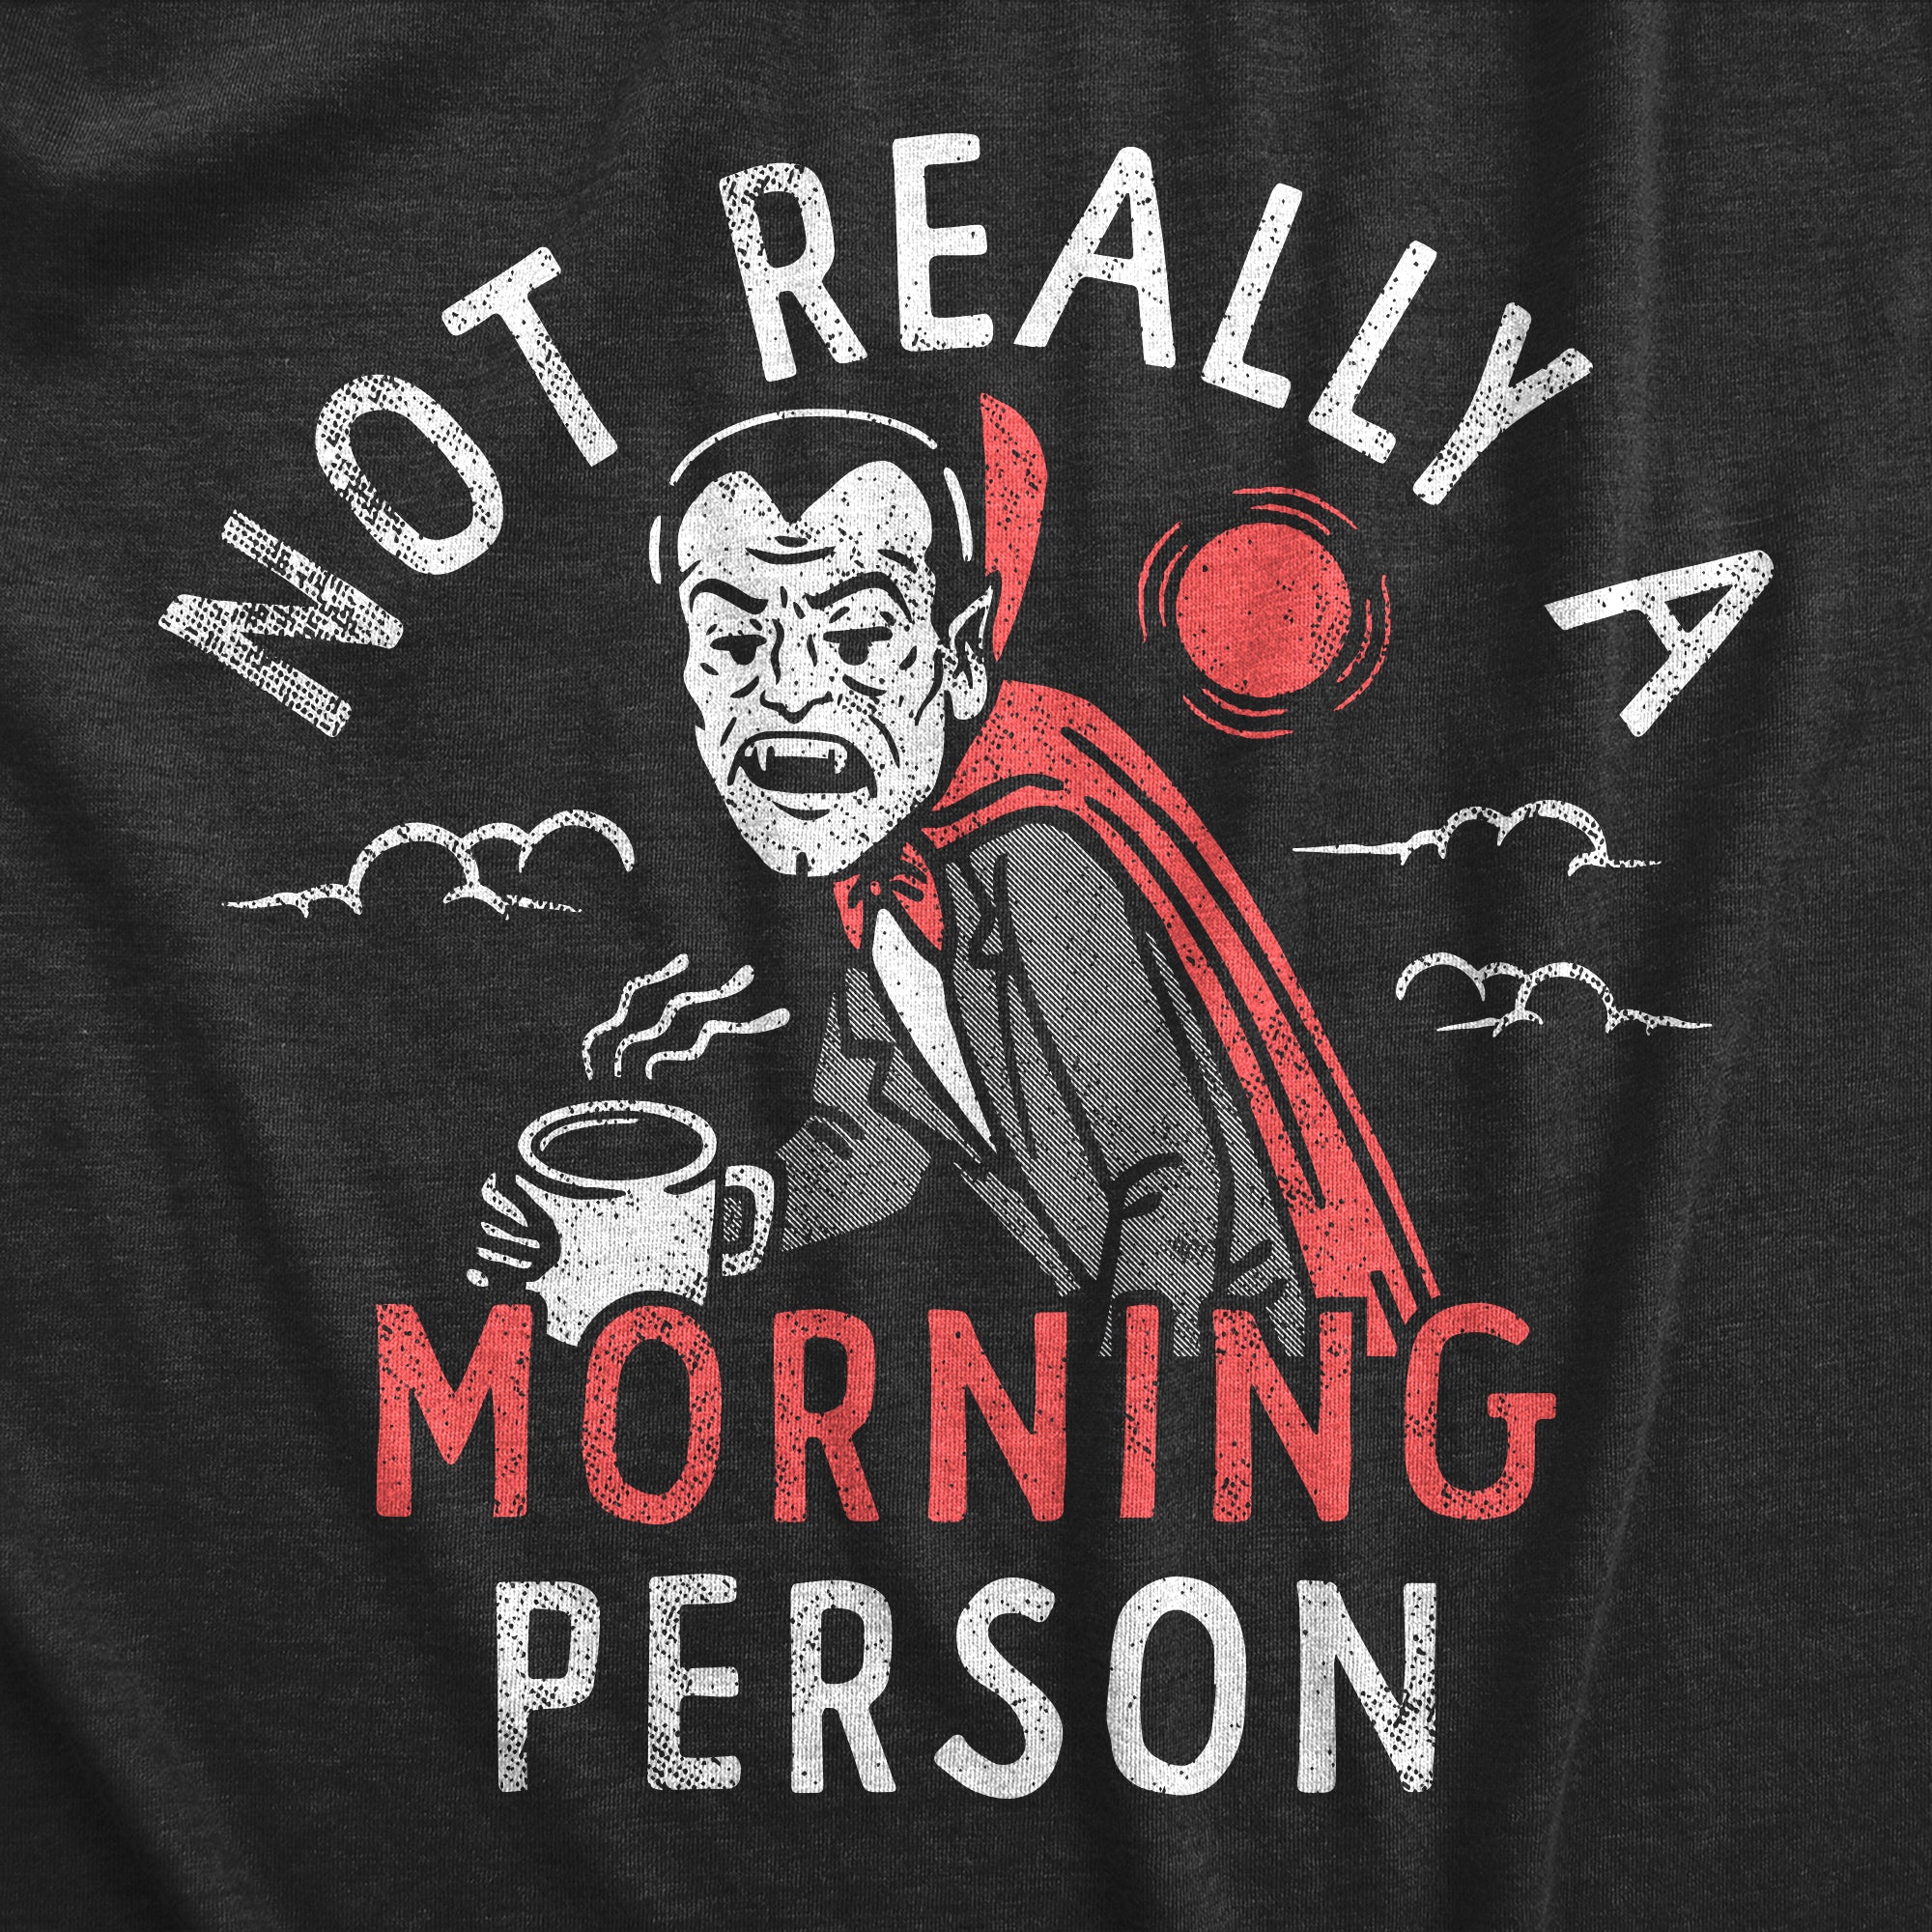 Funny Heather Black - MORNING Not Really A Morning Person Womens T Shirt Nerdy Halloween Sarcastic Tee